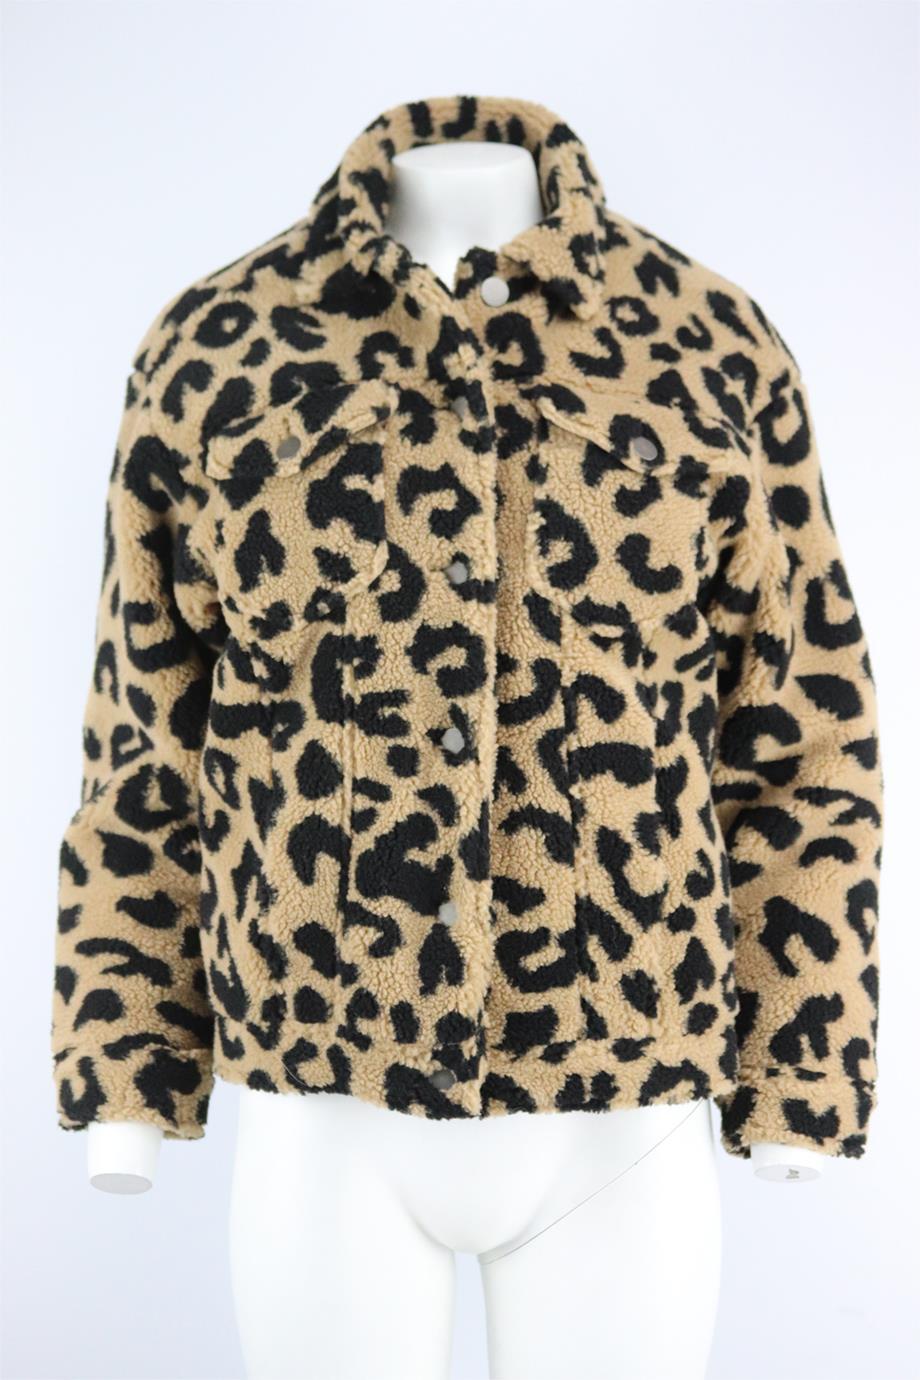 APPARIS leopard print faux shearling jacket. Brown and black. Long sleeve, v-neck. Button fastening at front. 100% Polyester; lining: 100% polyester. Size: Small (UK 8, US 4, FR 36, IT 40). Shoulder to shoulder: 20 in. Bust: 44 in. Waist: 42 in.